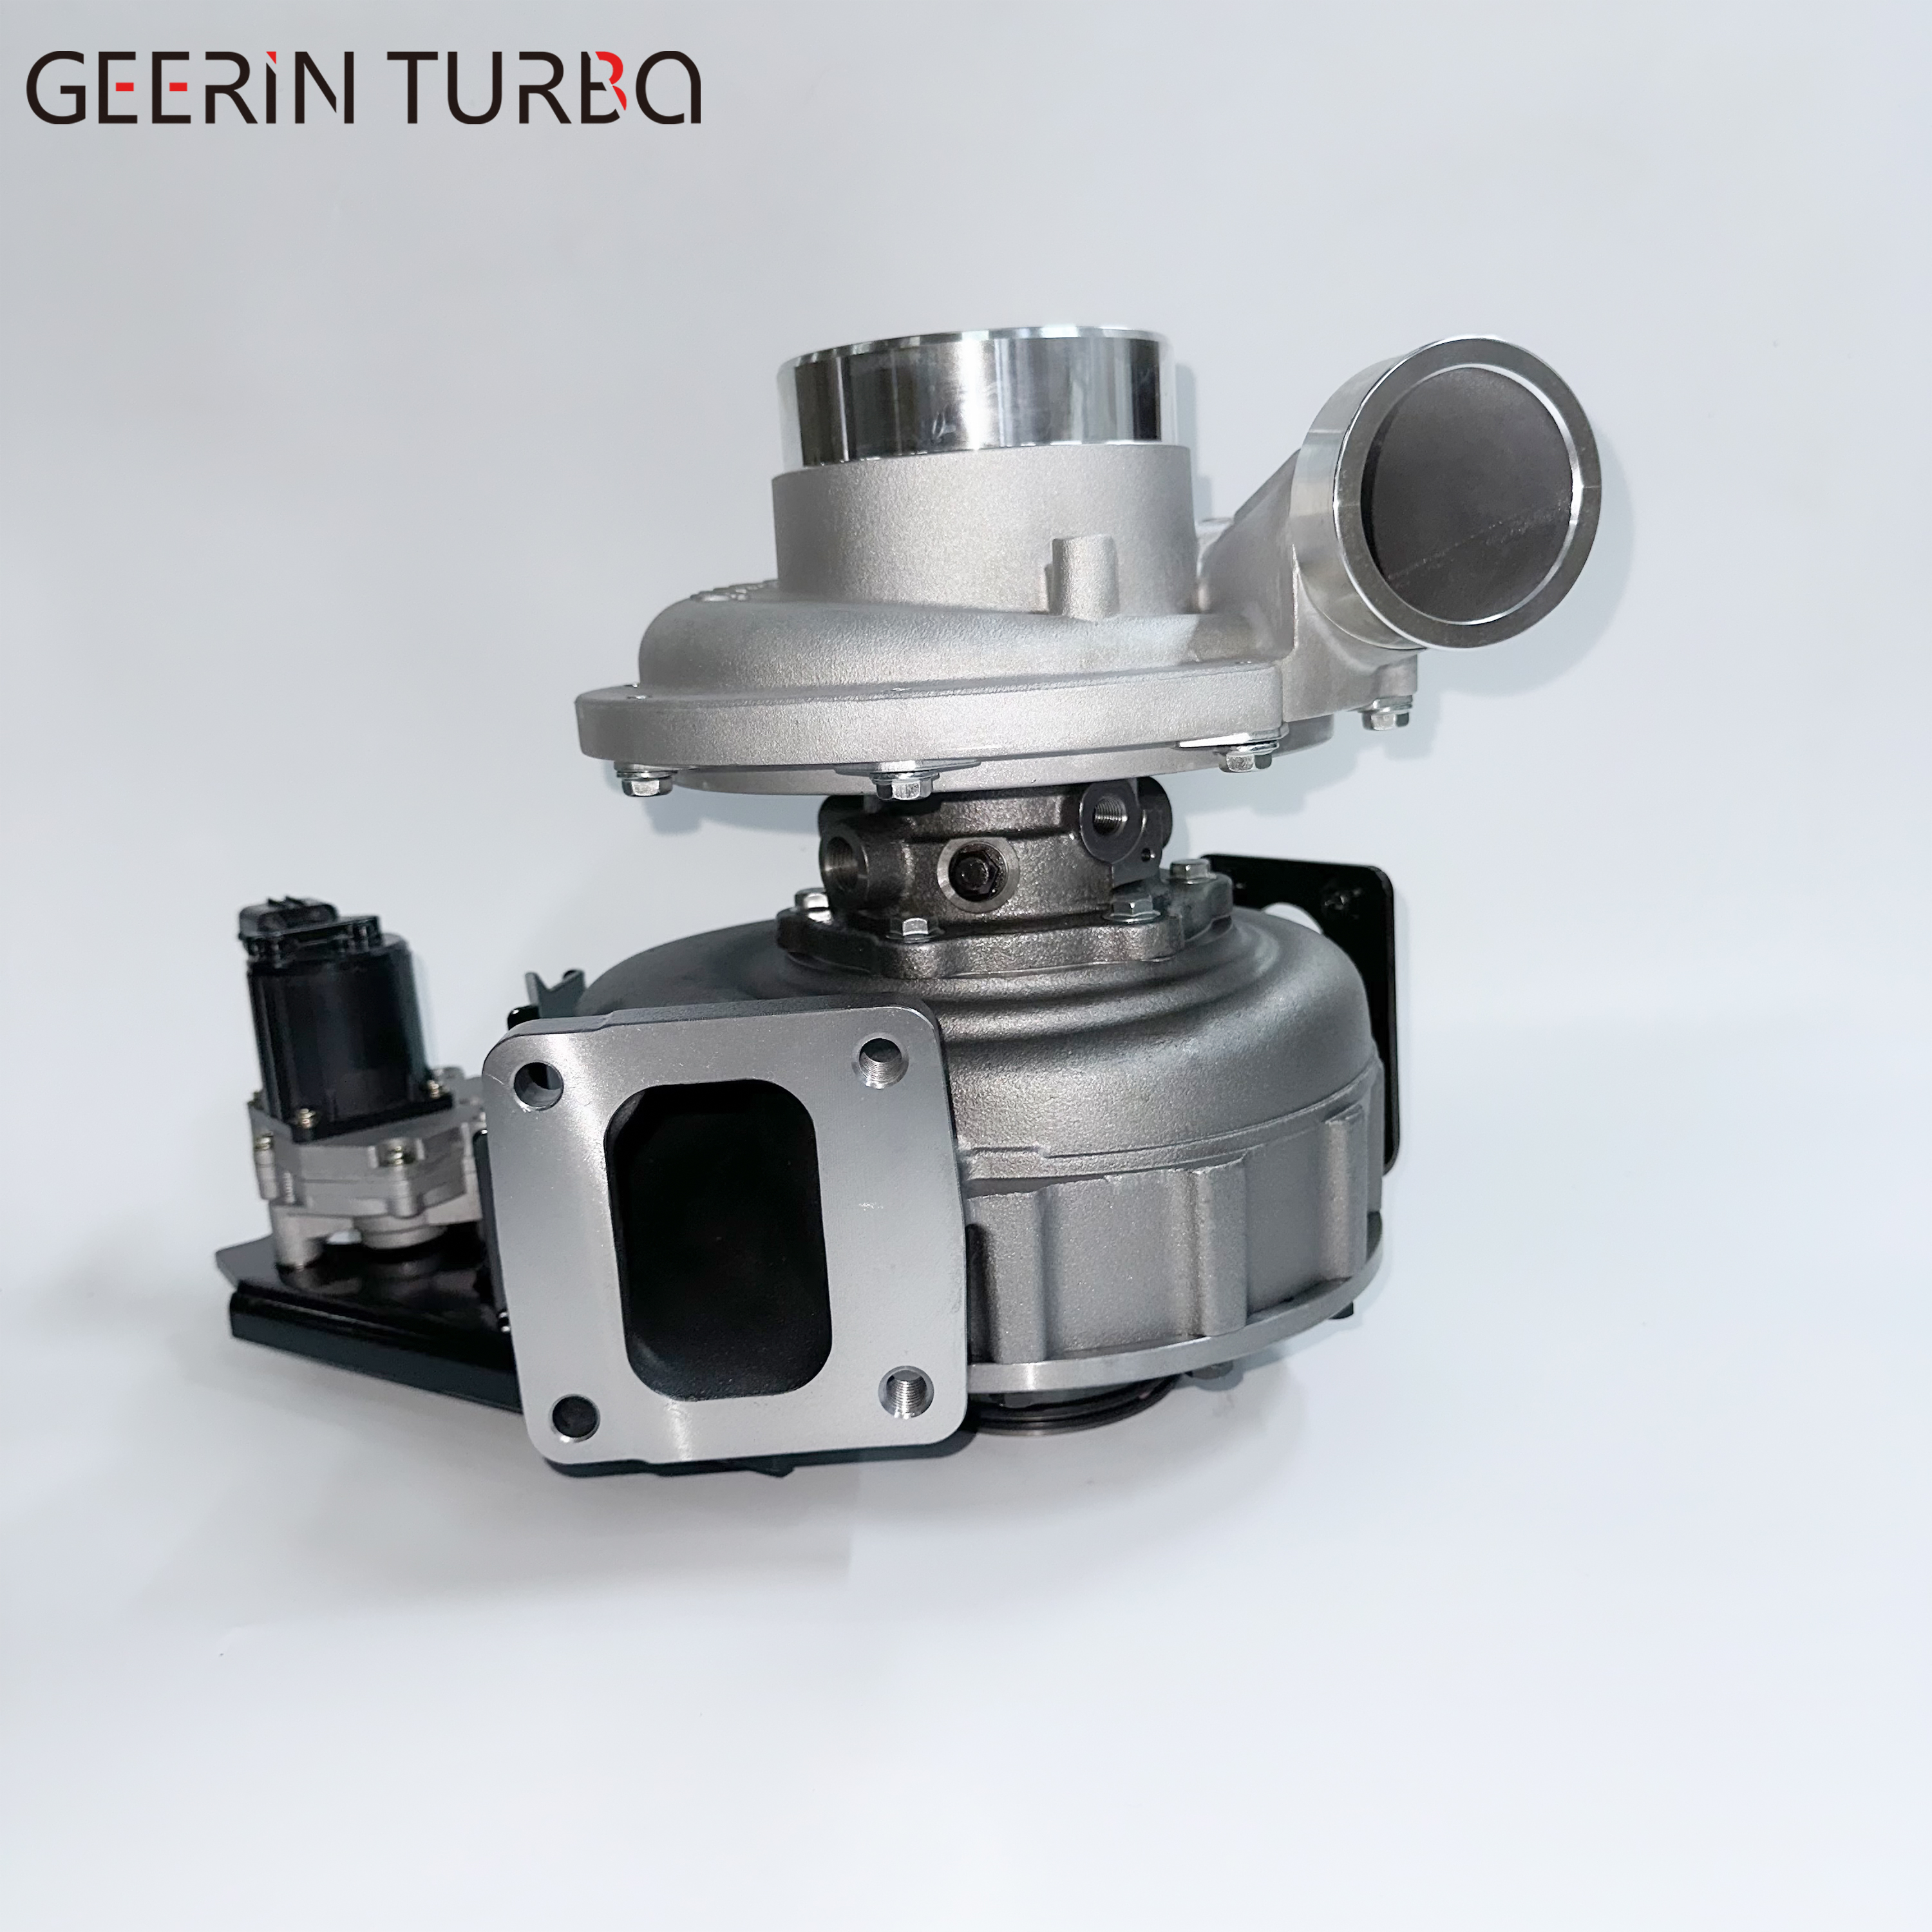 RHG8V S1760-E0022 S1760-E0M00 S1760-E0M40 E1760-E0021 S1760-E0020 Full Turbocharger For HINO